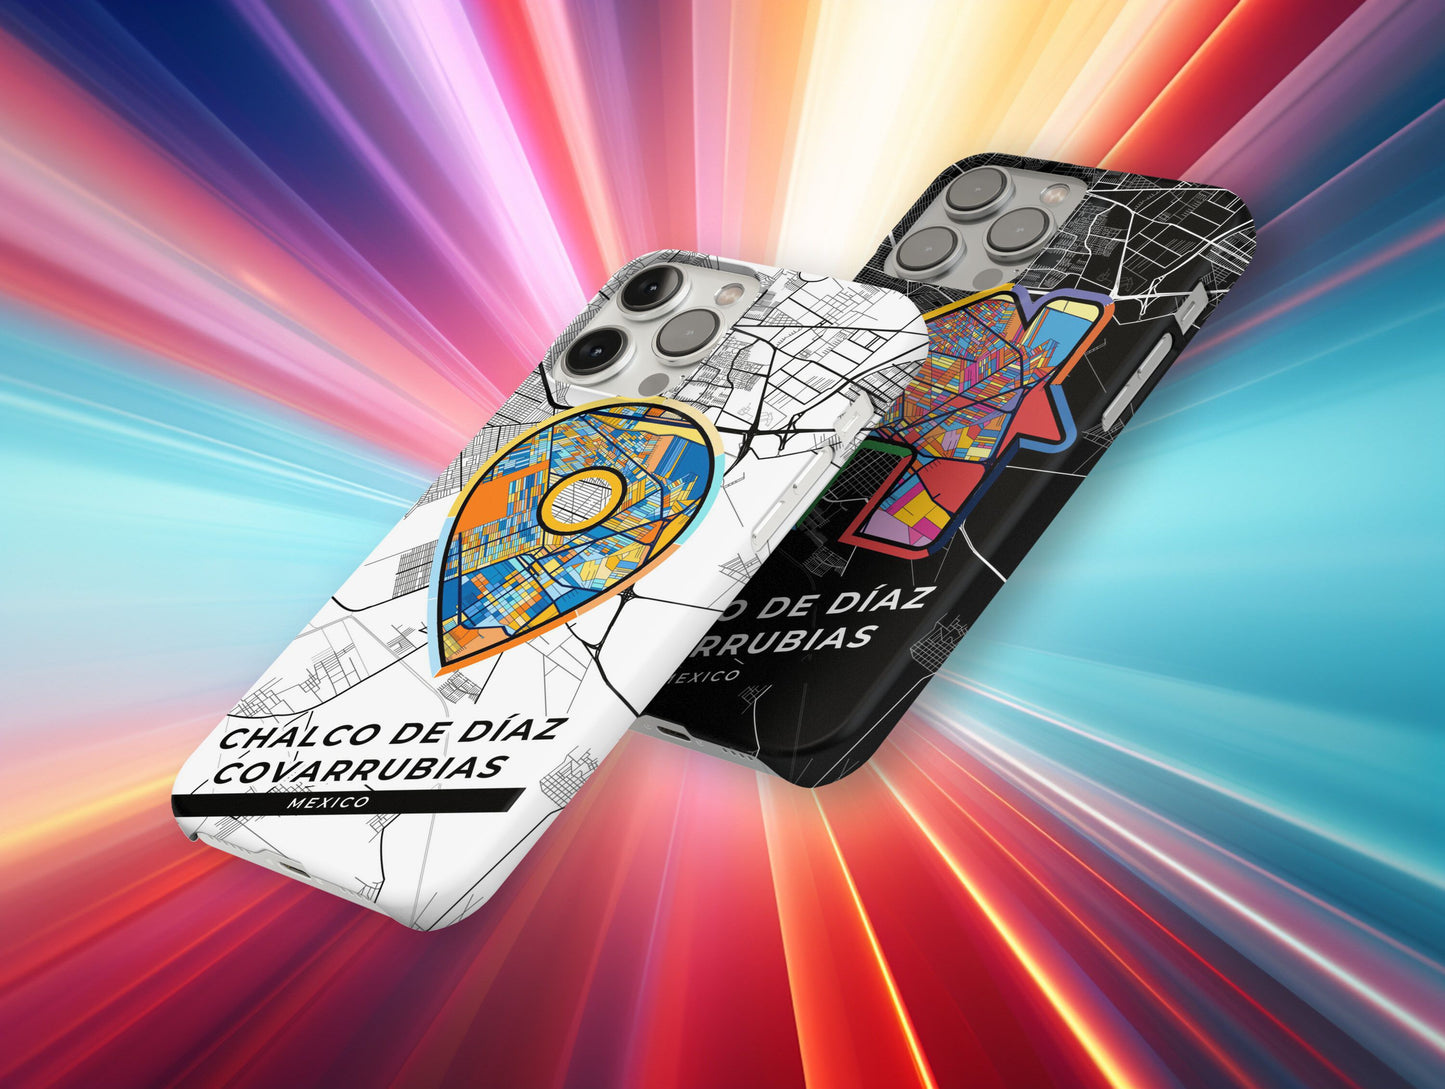 Chalco De Díaz Covarrubias Mexico slim phone case with colorful icon. Birthday, wedding or housewarming gift. Couple match cases.